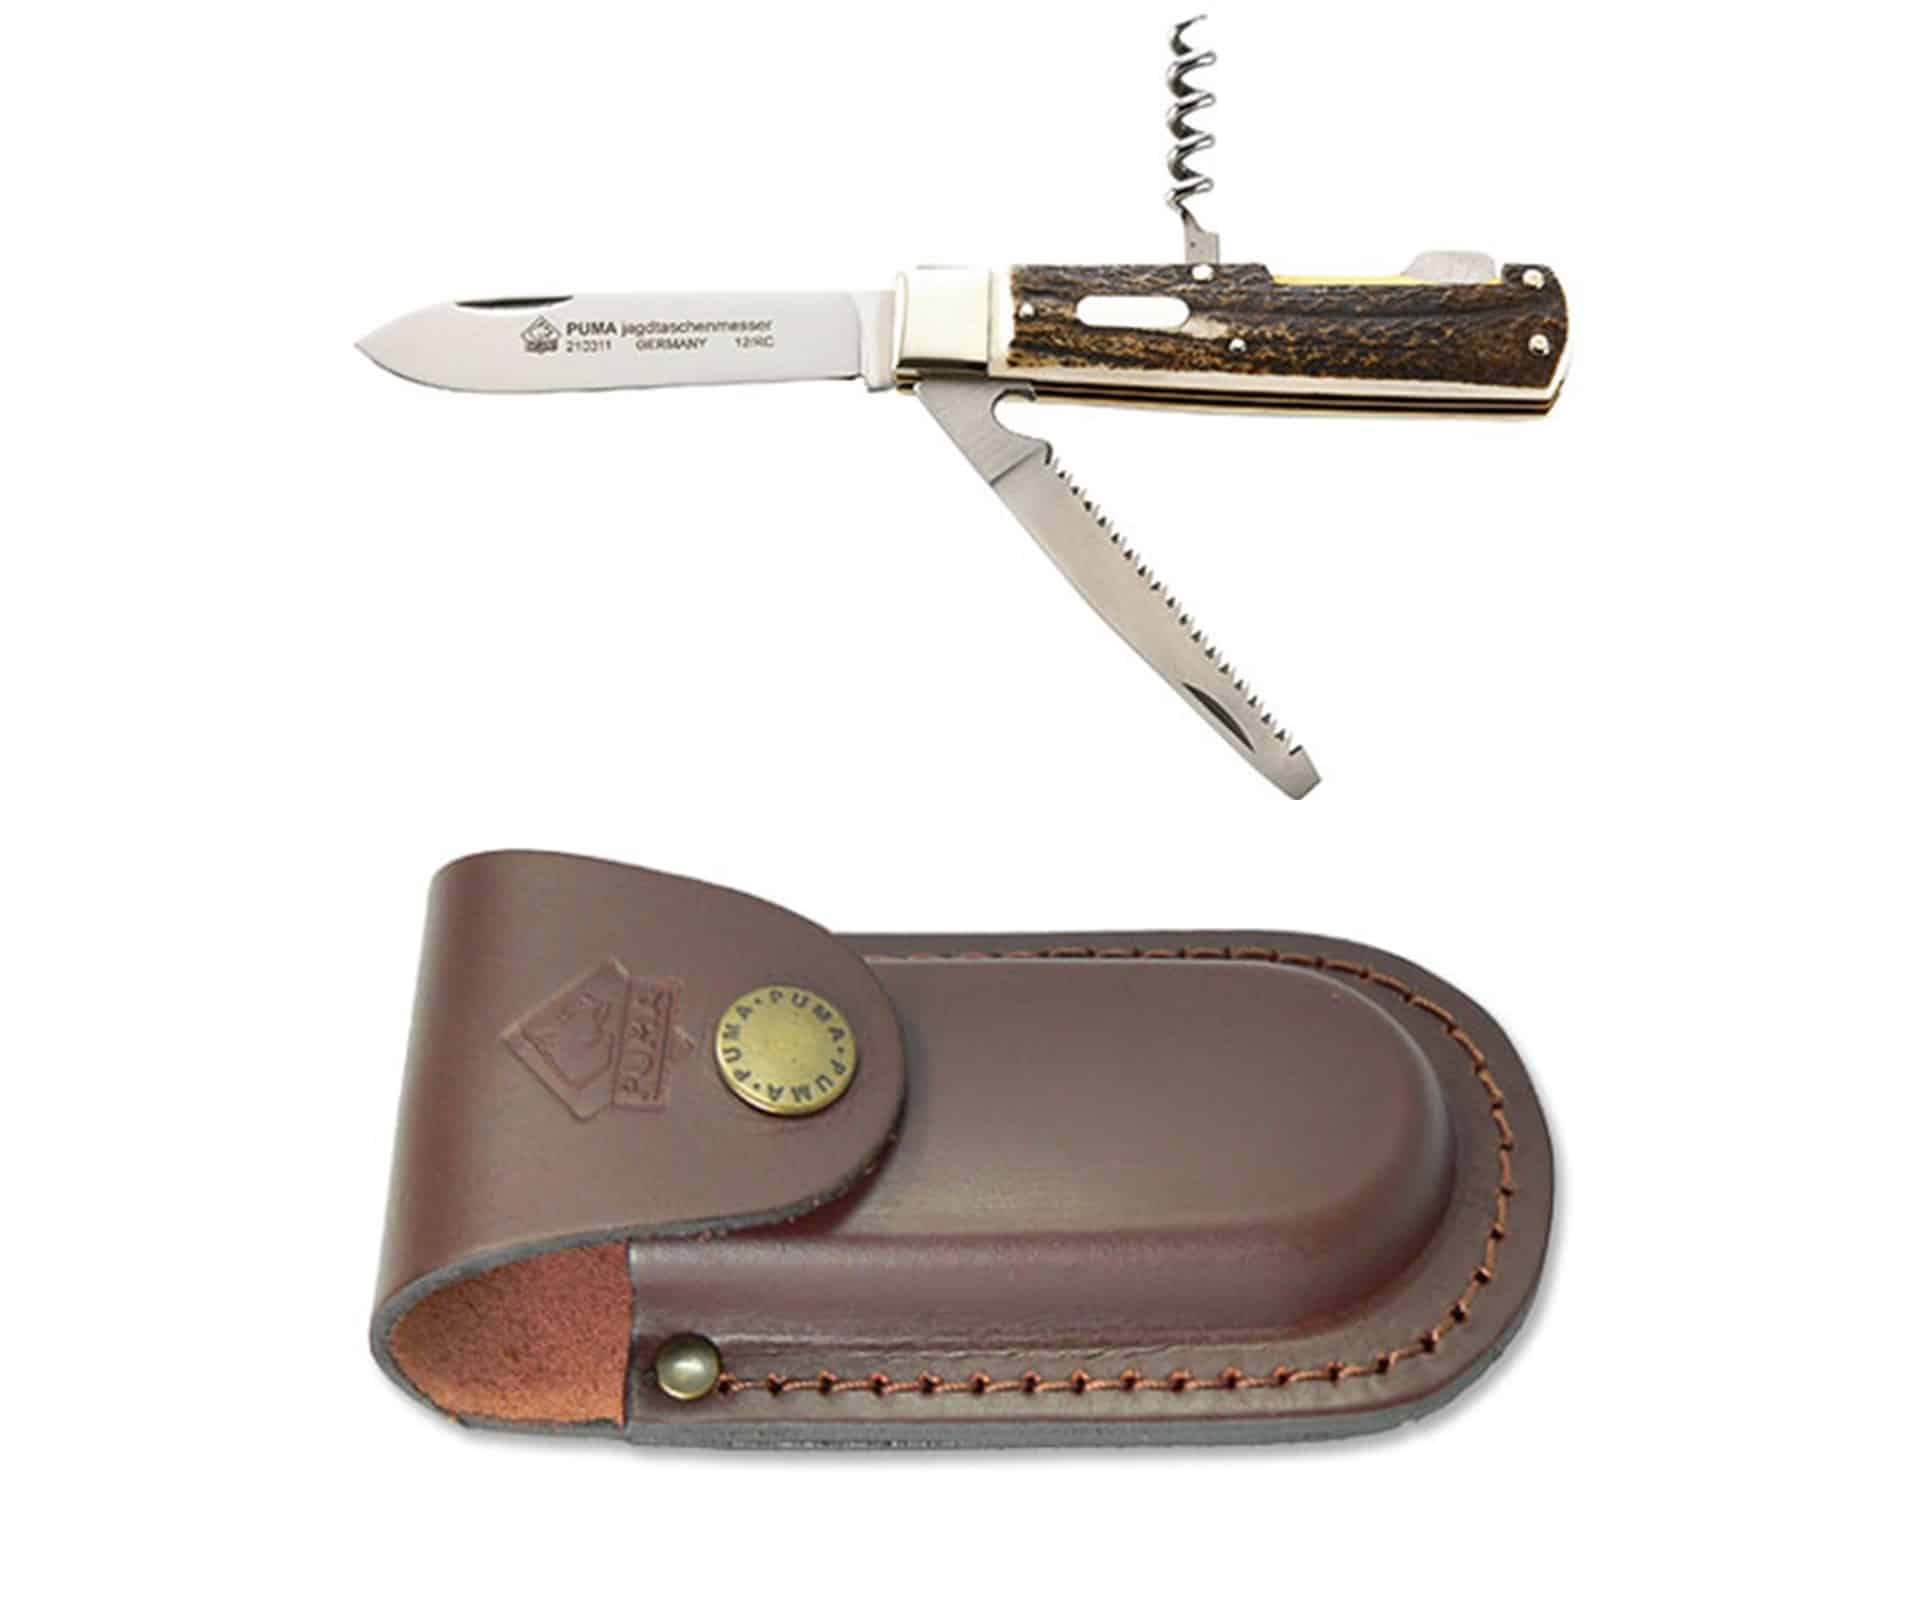 Puma hunting pocket knife 3-part with brown belt pouch